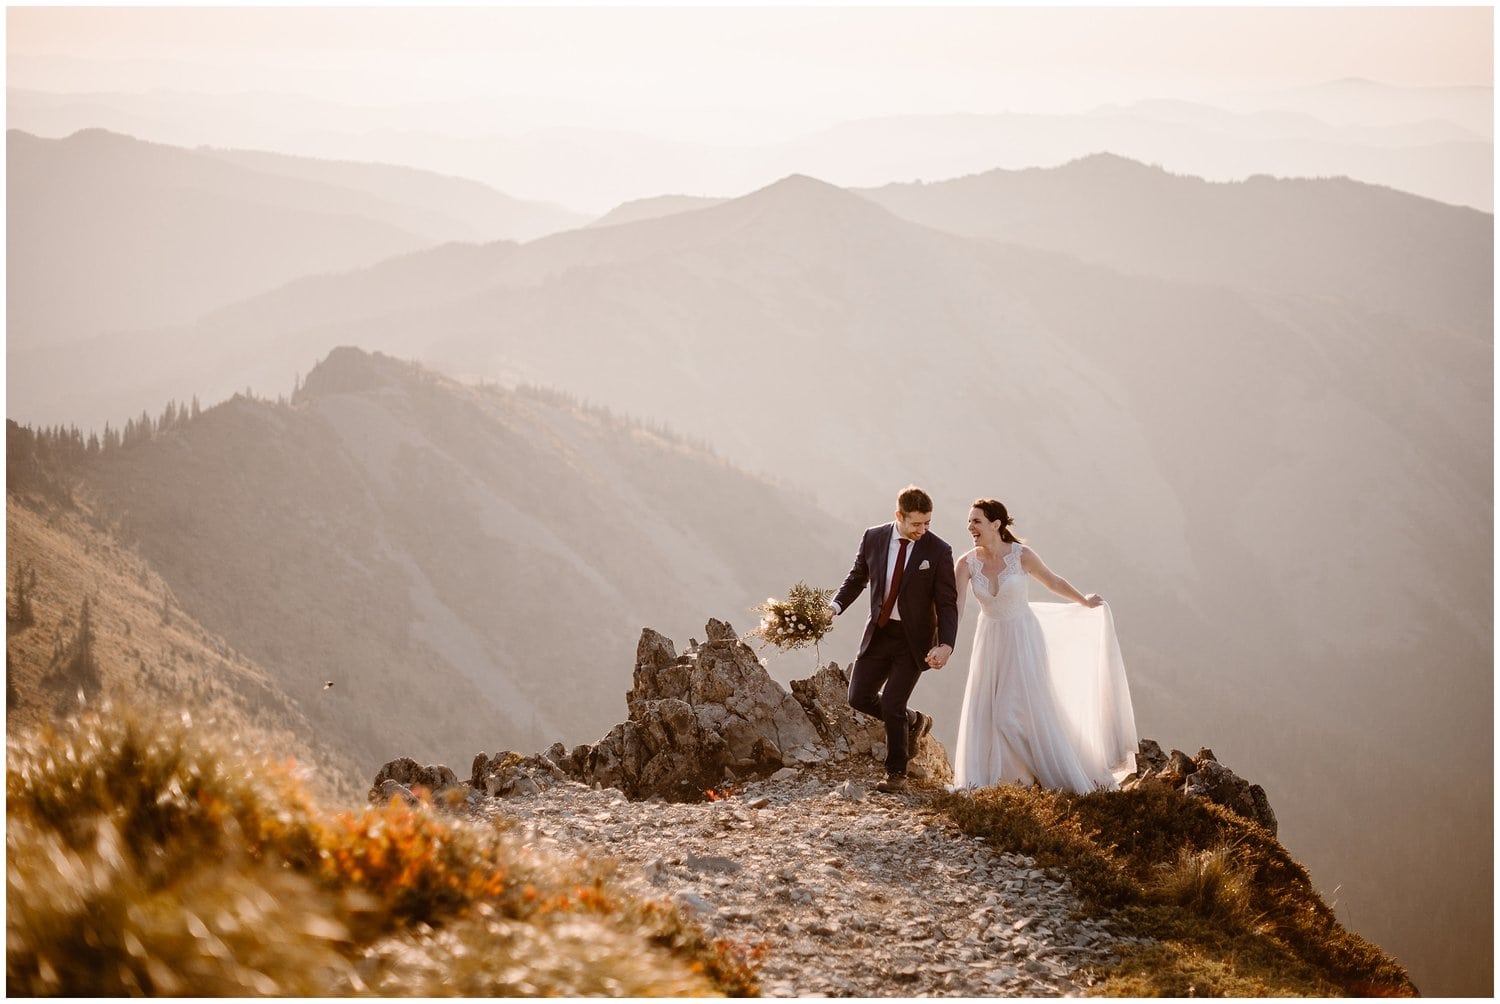 Bride and groom hold hands and walk along mountain ridge during sunrise in Washington. There are mountains in the background. 